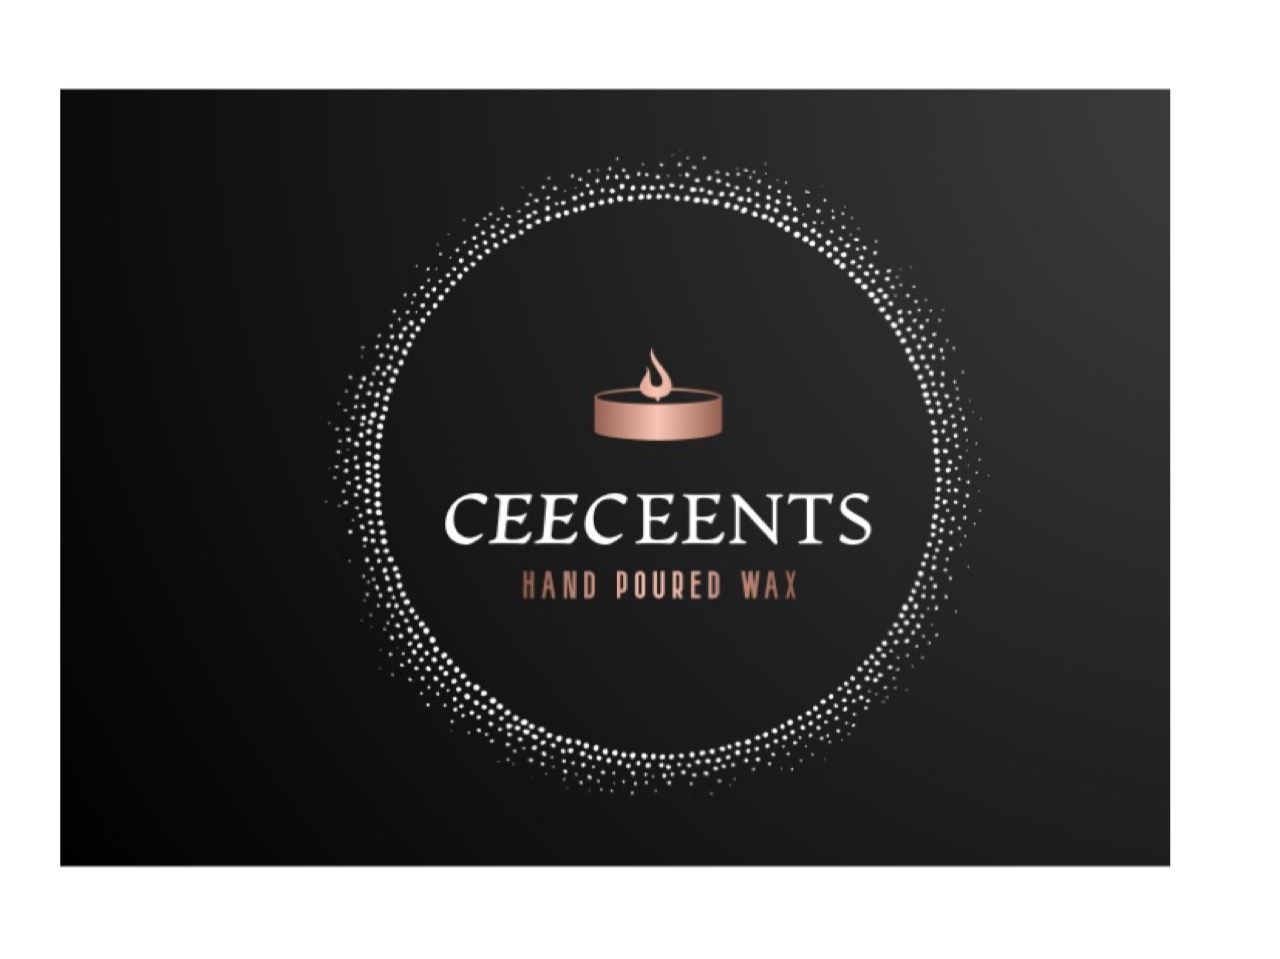 This shop is called CeeCeents 